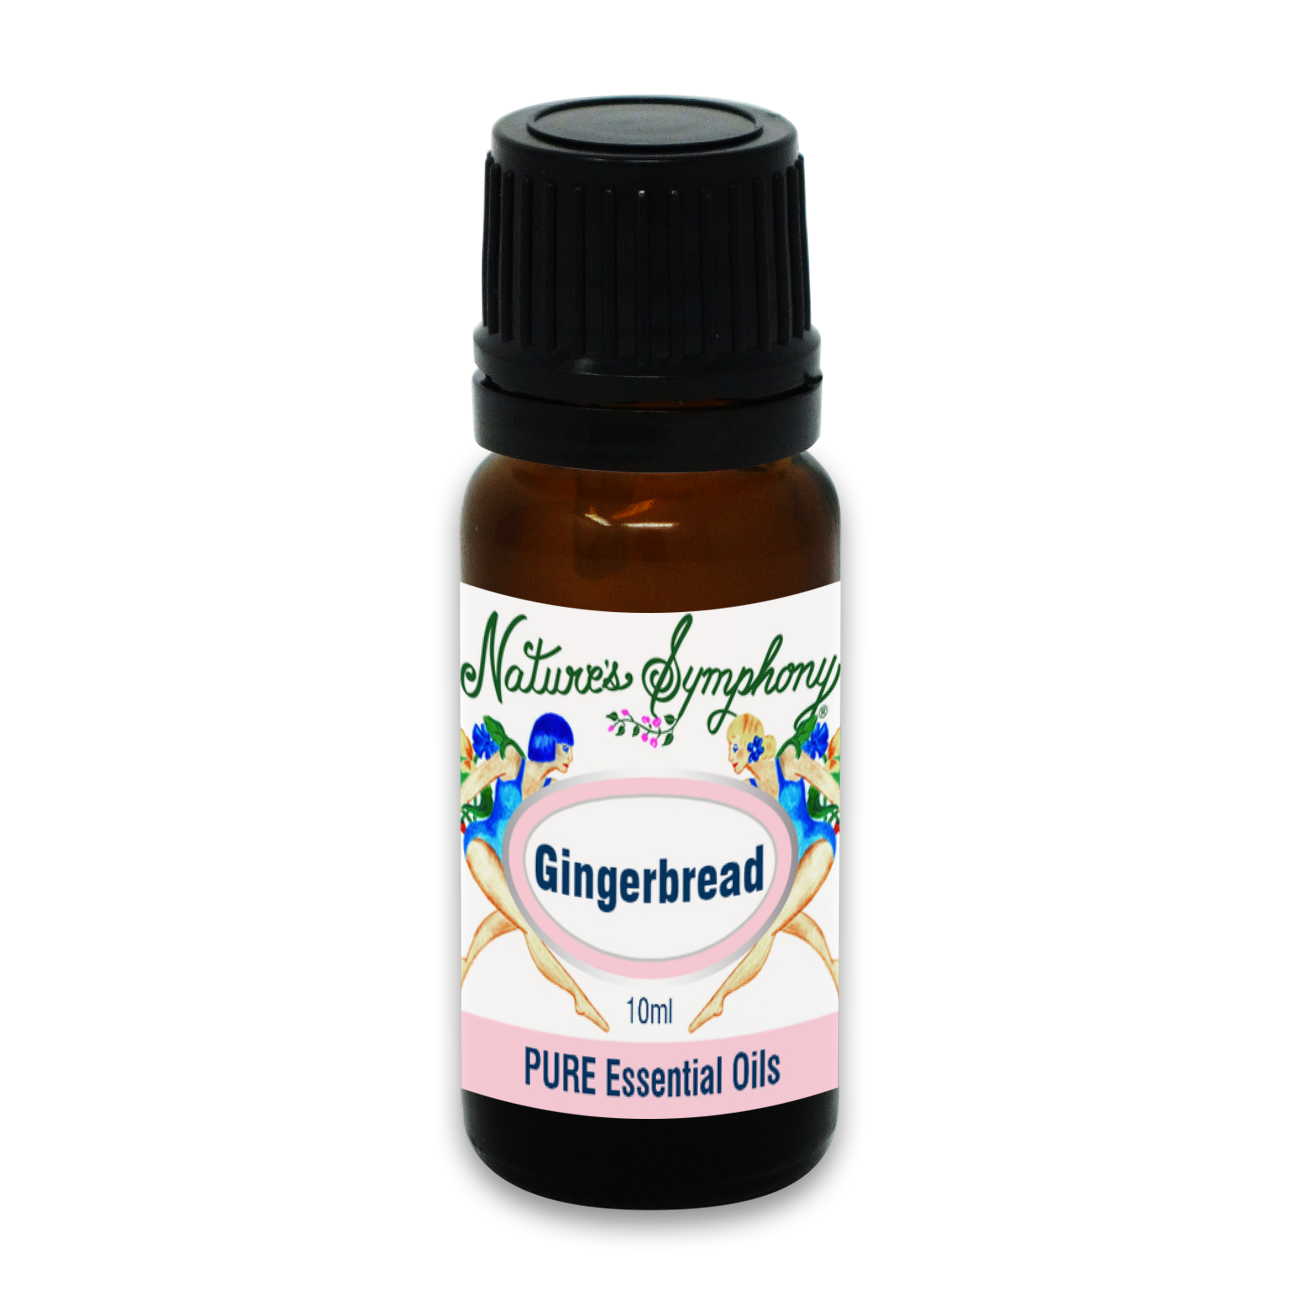 Gingerbread, Ambiance Diffusion blend - 10ml